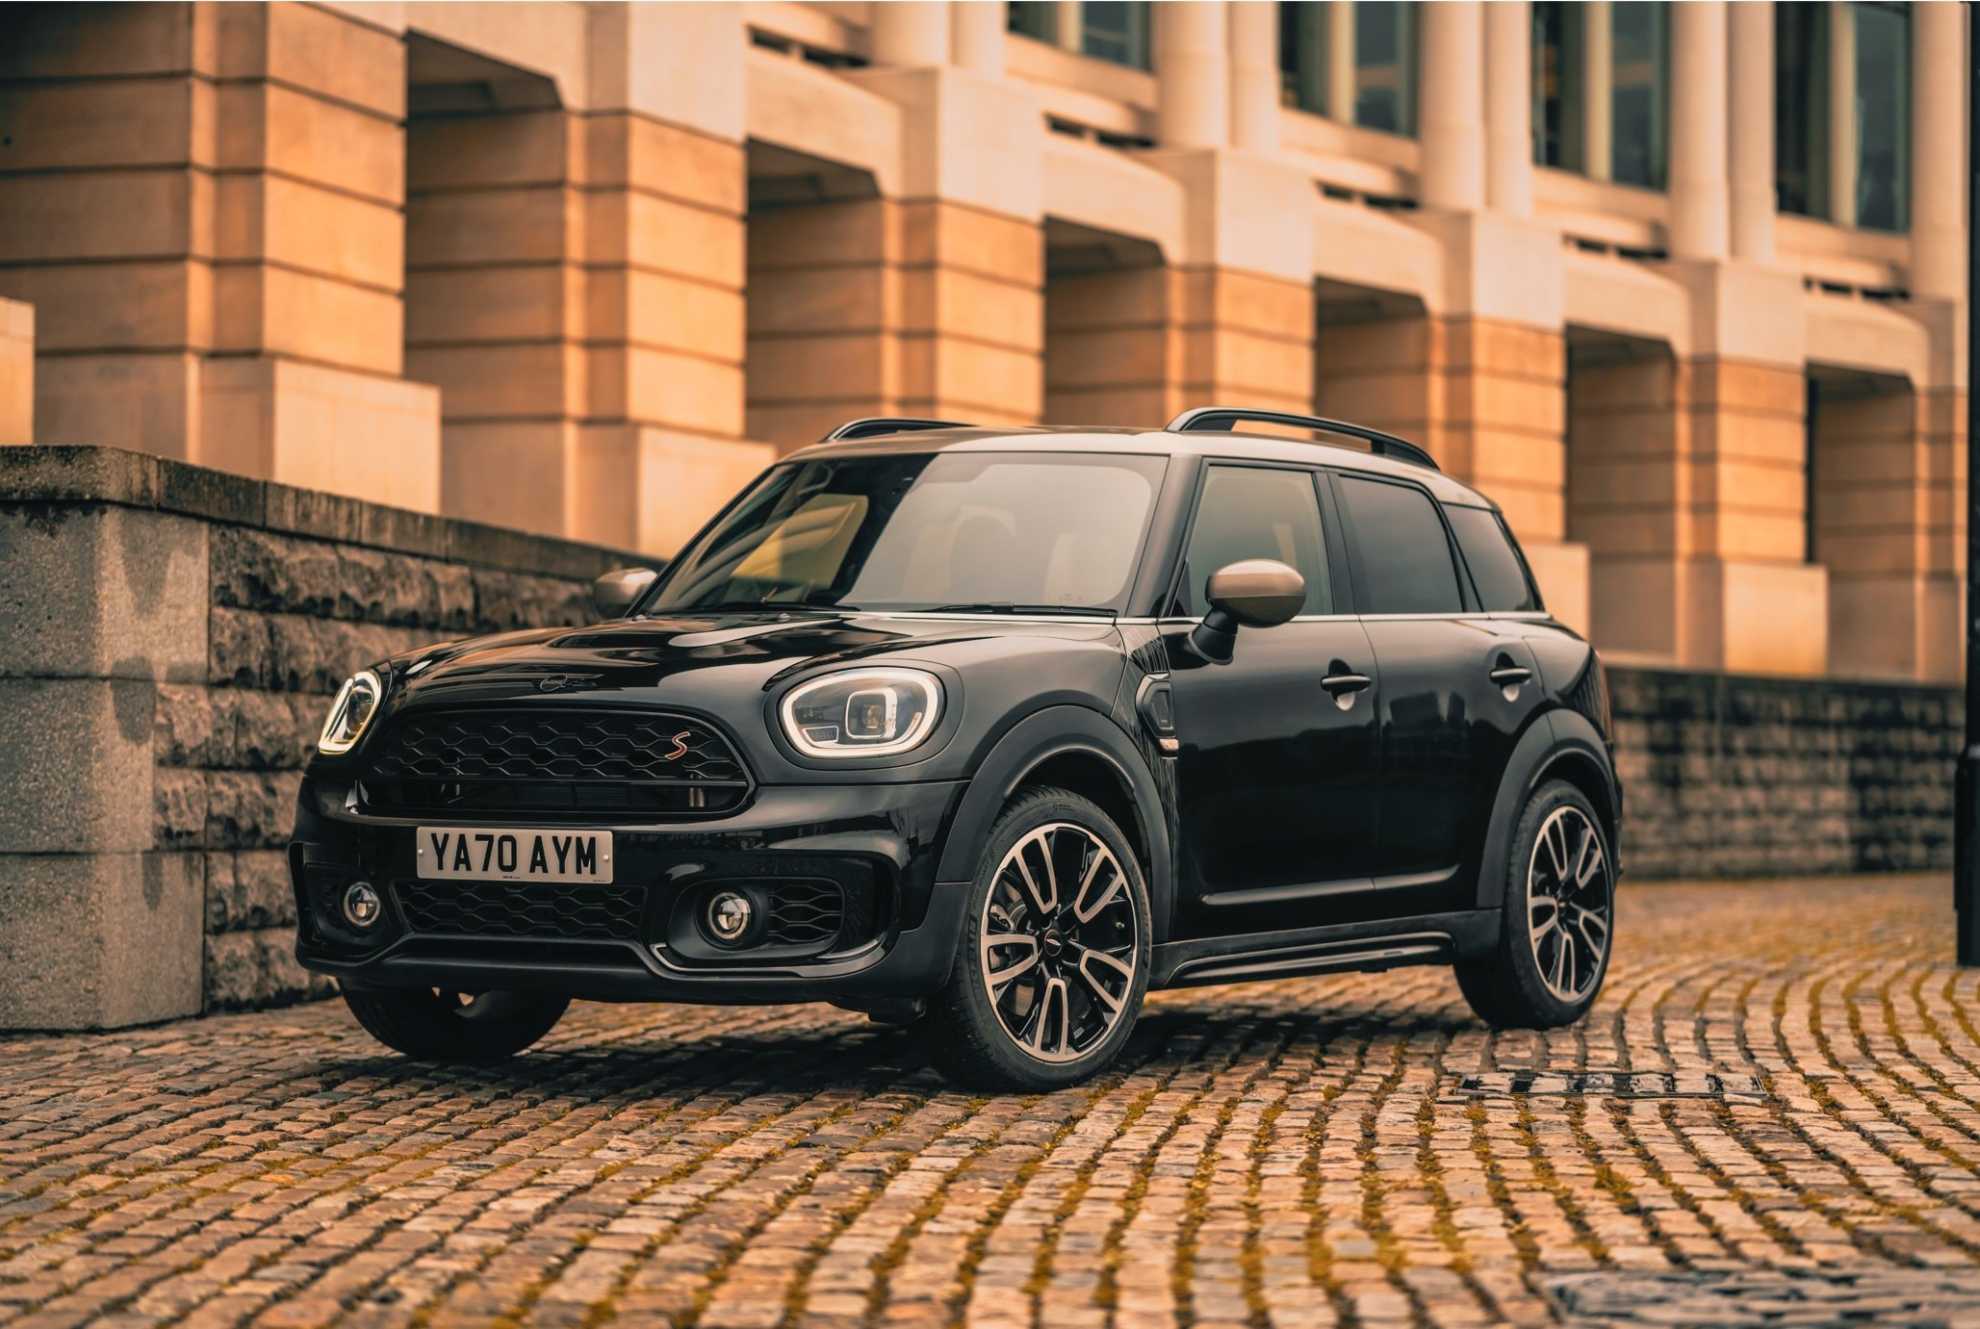 The Mini Countryman Shadow Edition has been launched, with a price tag of Rs 49 lakh